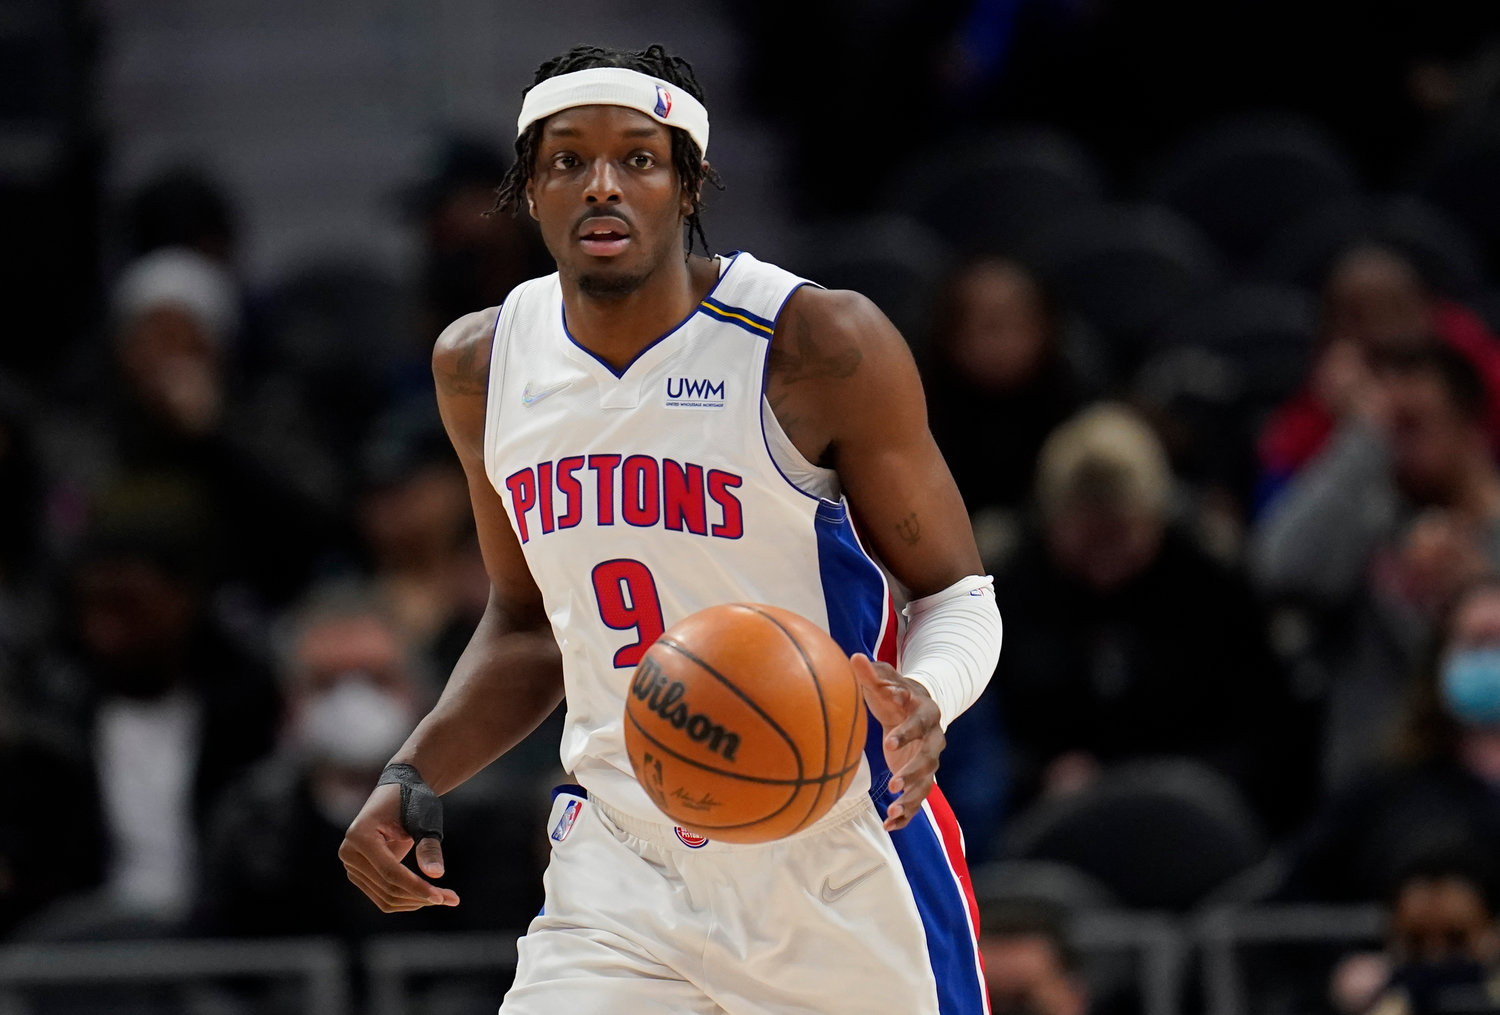 Detroit Pistons forward Jerami Grant brings the ball up against the Minnesota Timberwolves during the second half of a game in Detroit on Feb. 3. A person with knowledge of the move said the Pistons agreed Wednesday, to trade Grant to the Portland Trail Blazers.